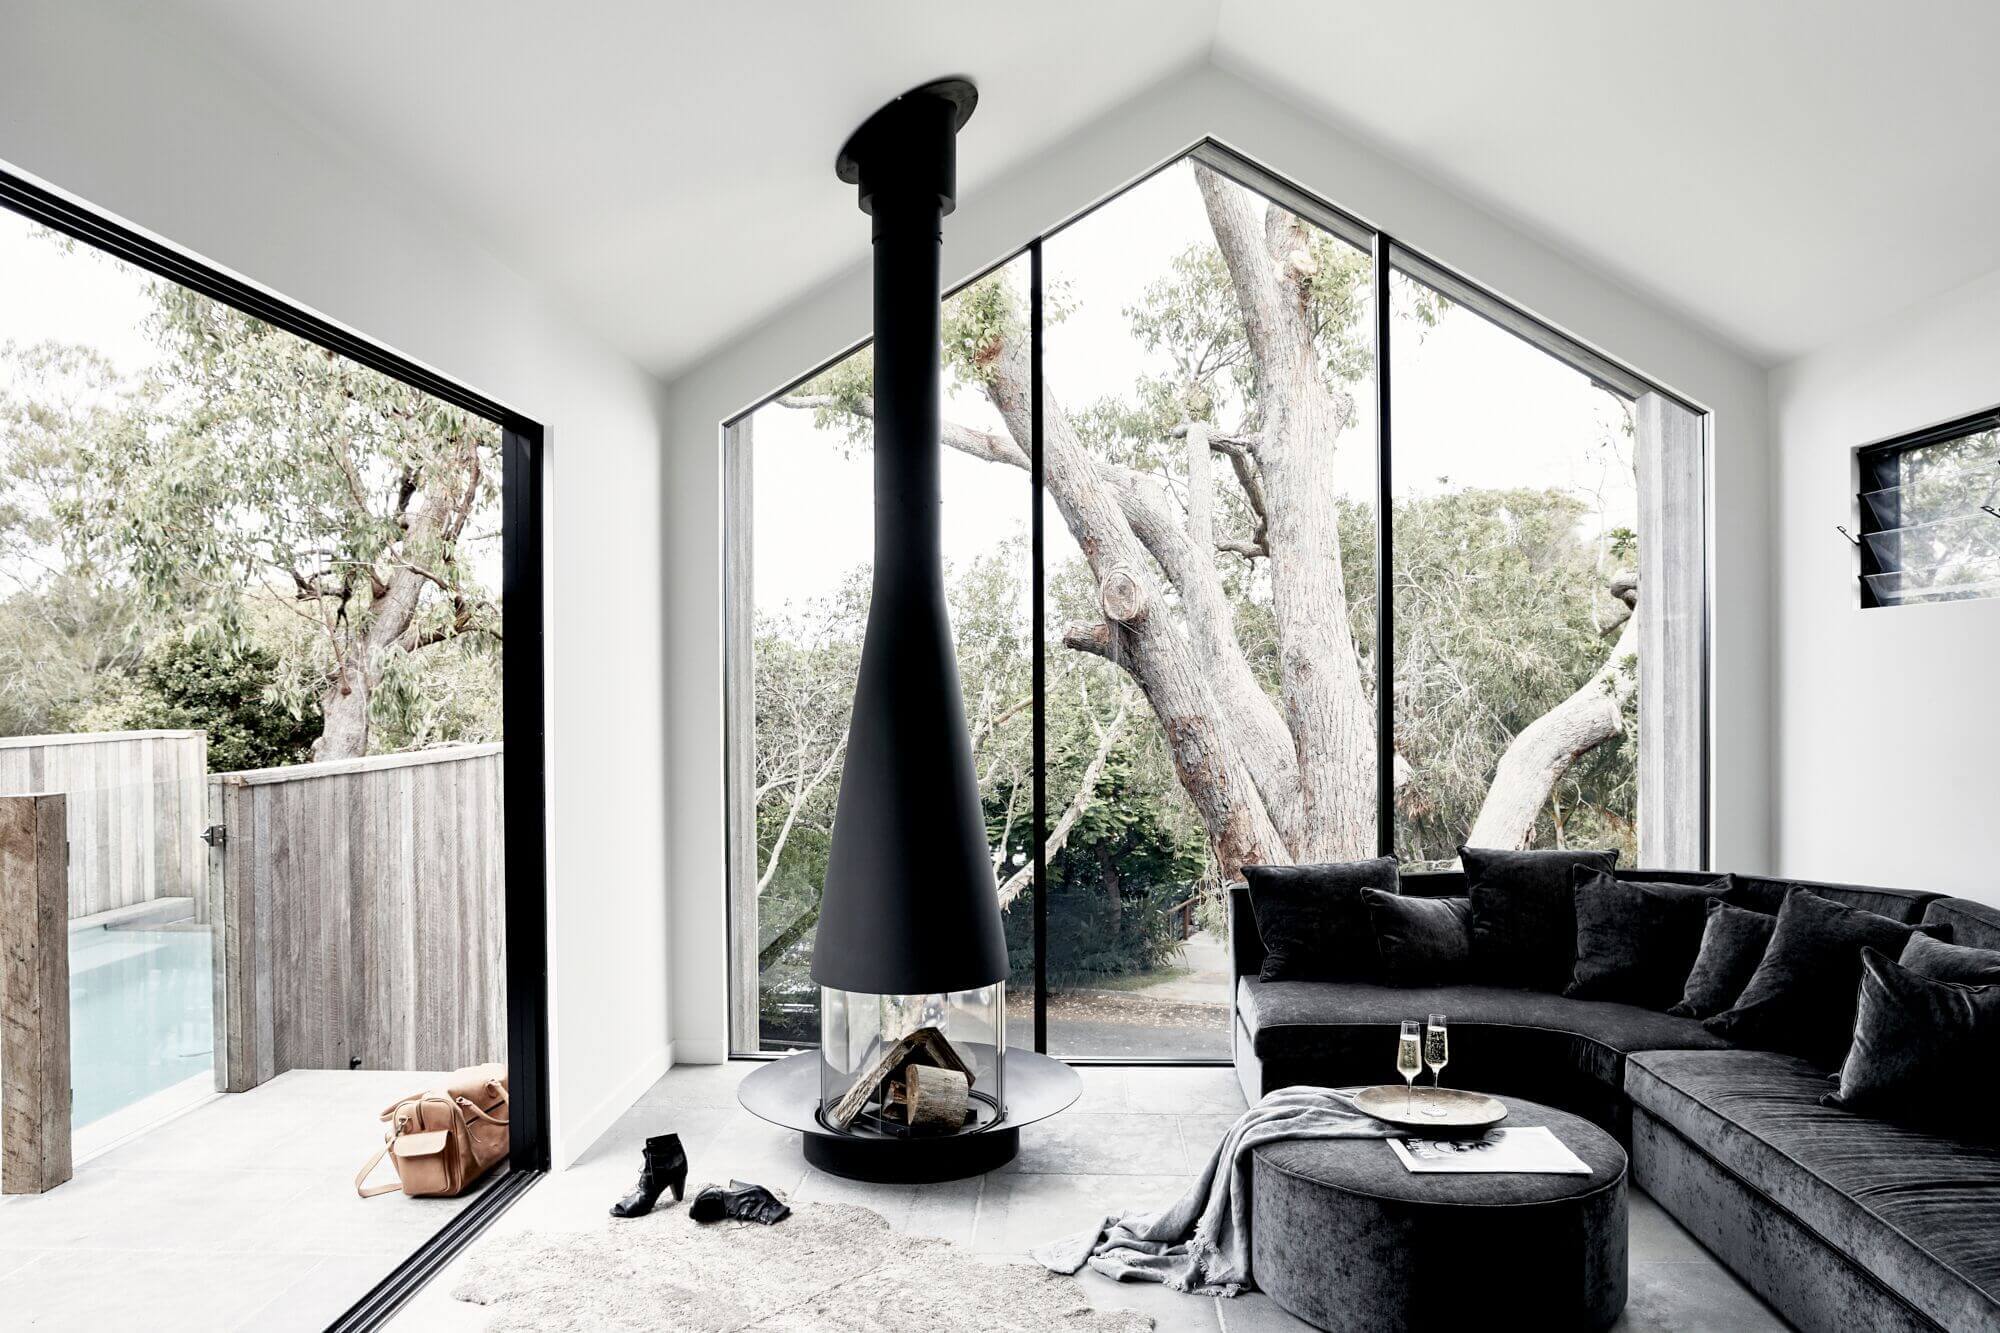 The Cabin, Byron Beach Abodes featured in Elle Magazine